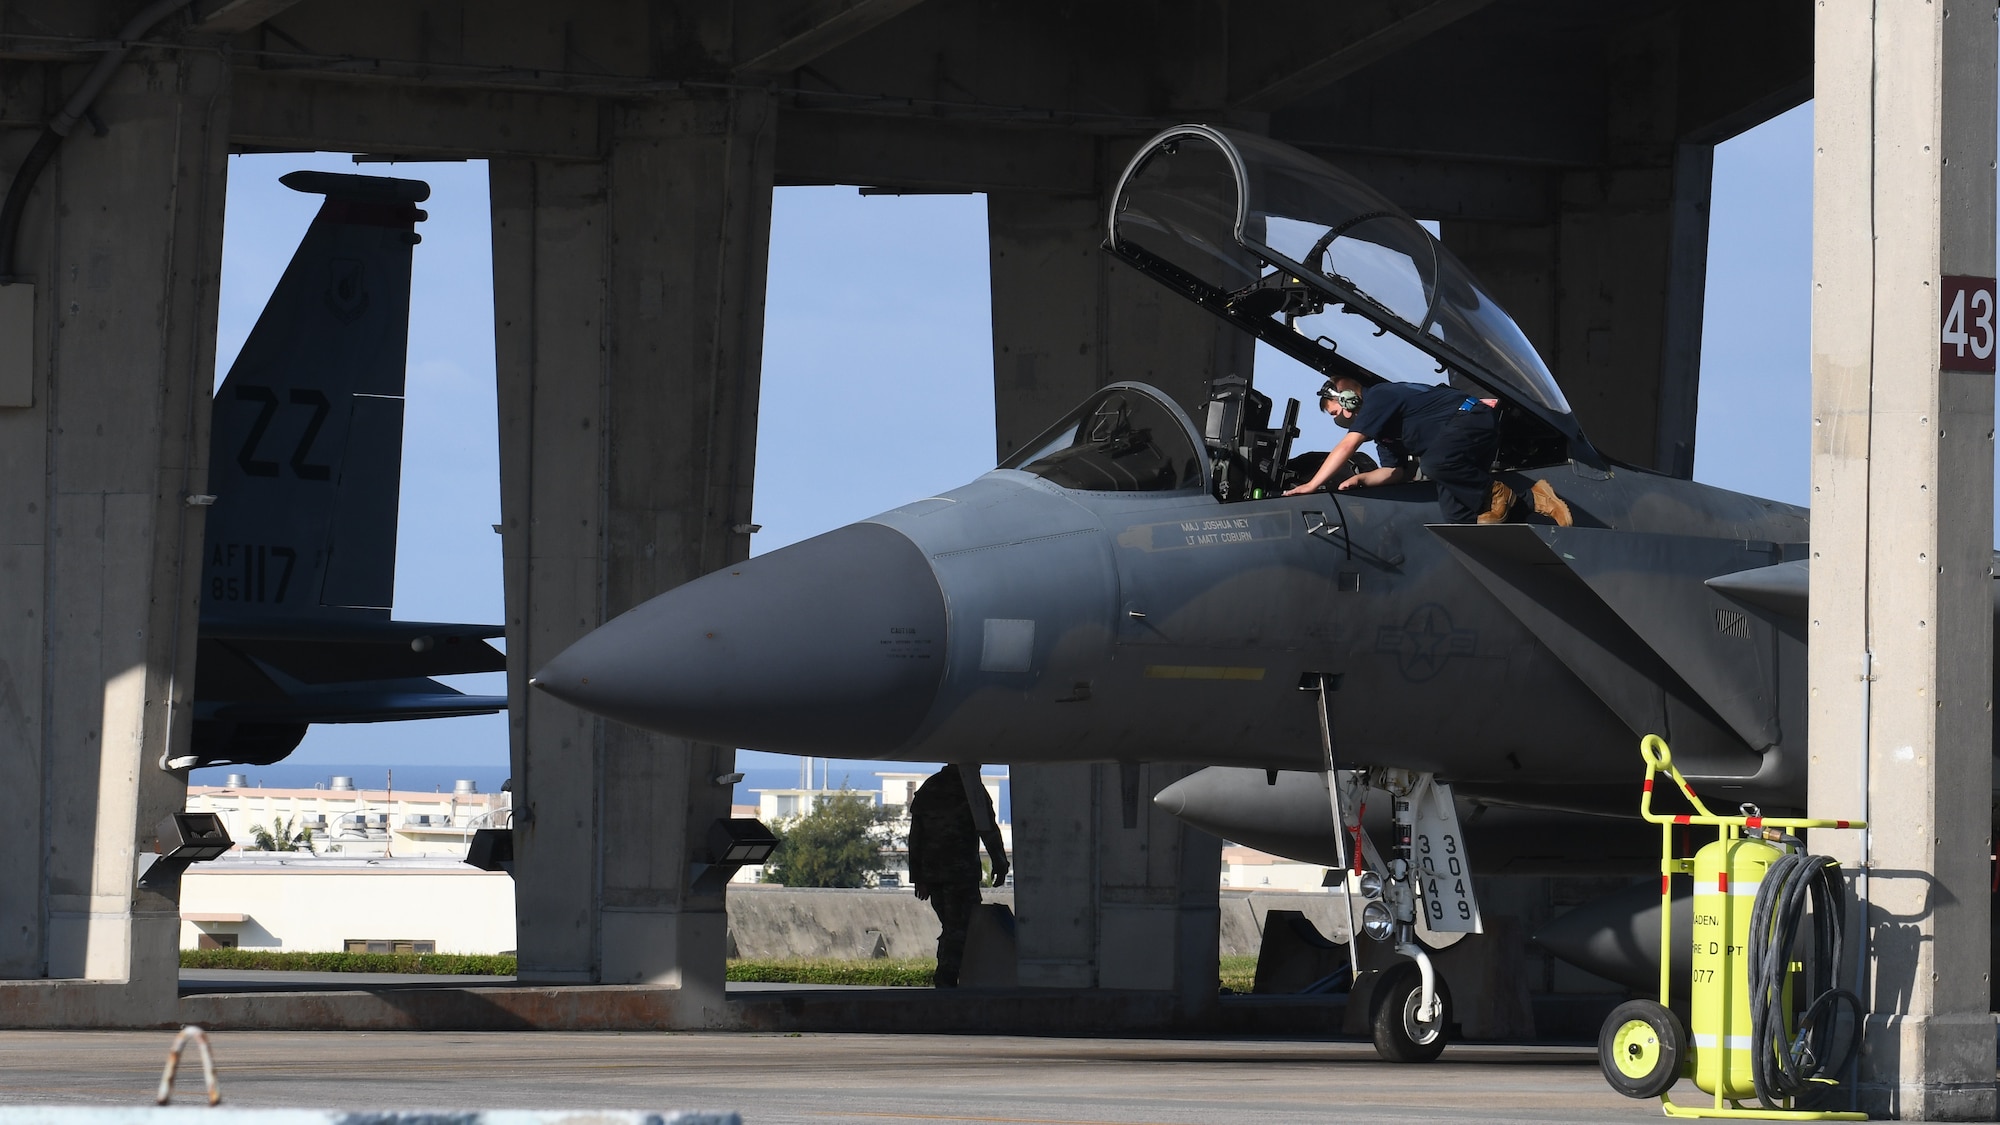 U.S. Air Force maintainers perform pre-flight checks on an F-15C Eagle